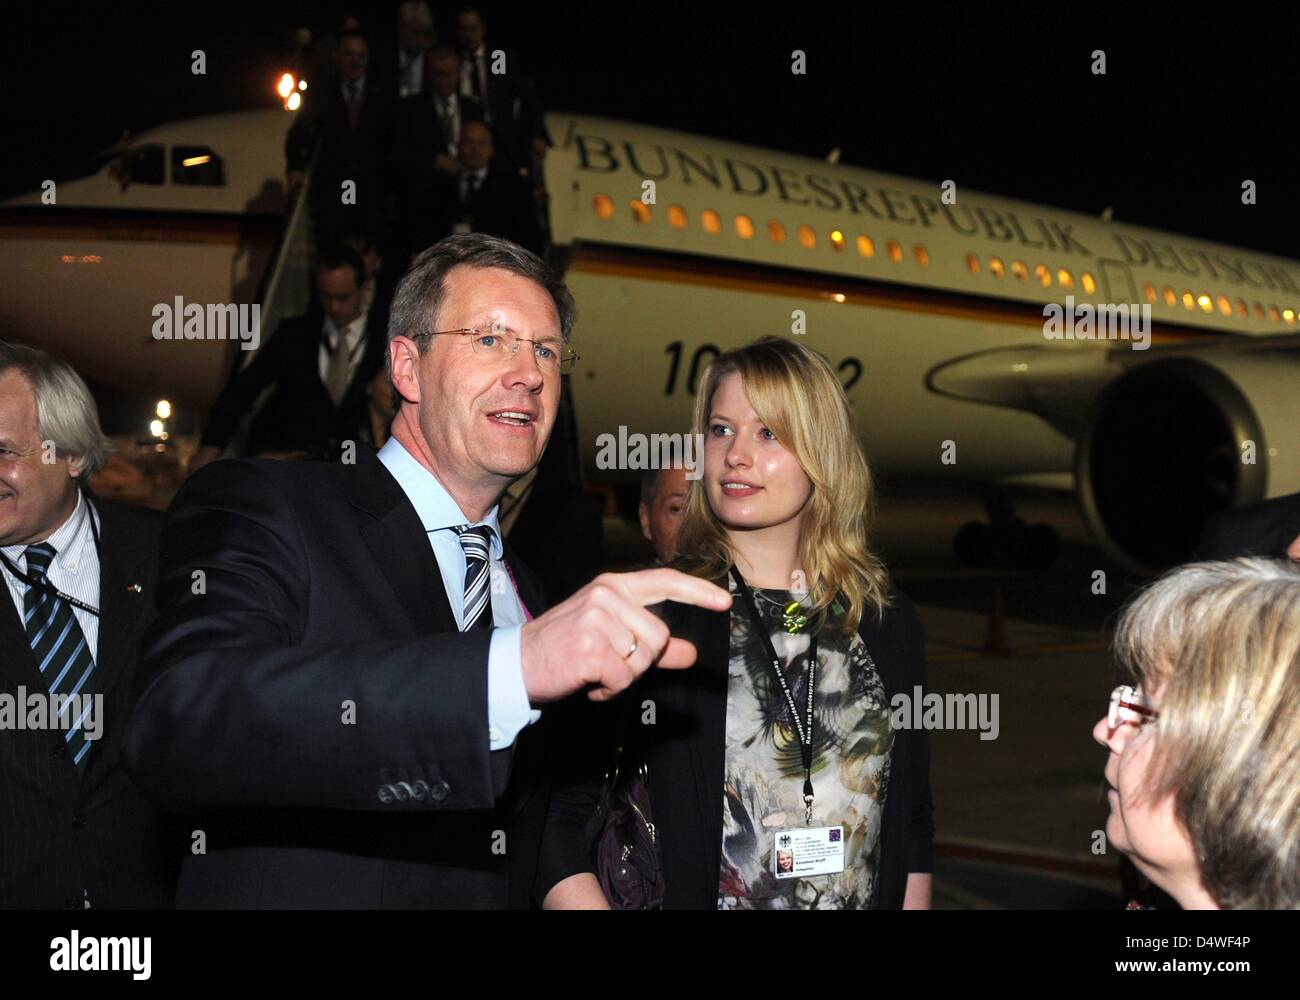 German President Christian Wulff and daughter Annalena are welcomed in Tel Aviv, Israel, 27 November 2010. Wulff's 17-year-old daughter accompanies Mr Wulff on his four-day visit to Israel in stead of his wife Bettina. The choice of travel companion is supposed to symbolize the importance of transmitting the memory of the Holocaust to younger generations. Photo: RAINER JENSEN Stock Photo